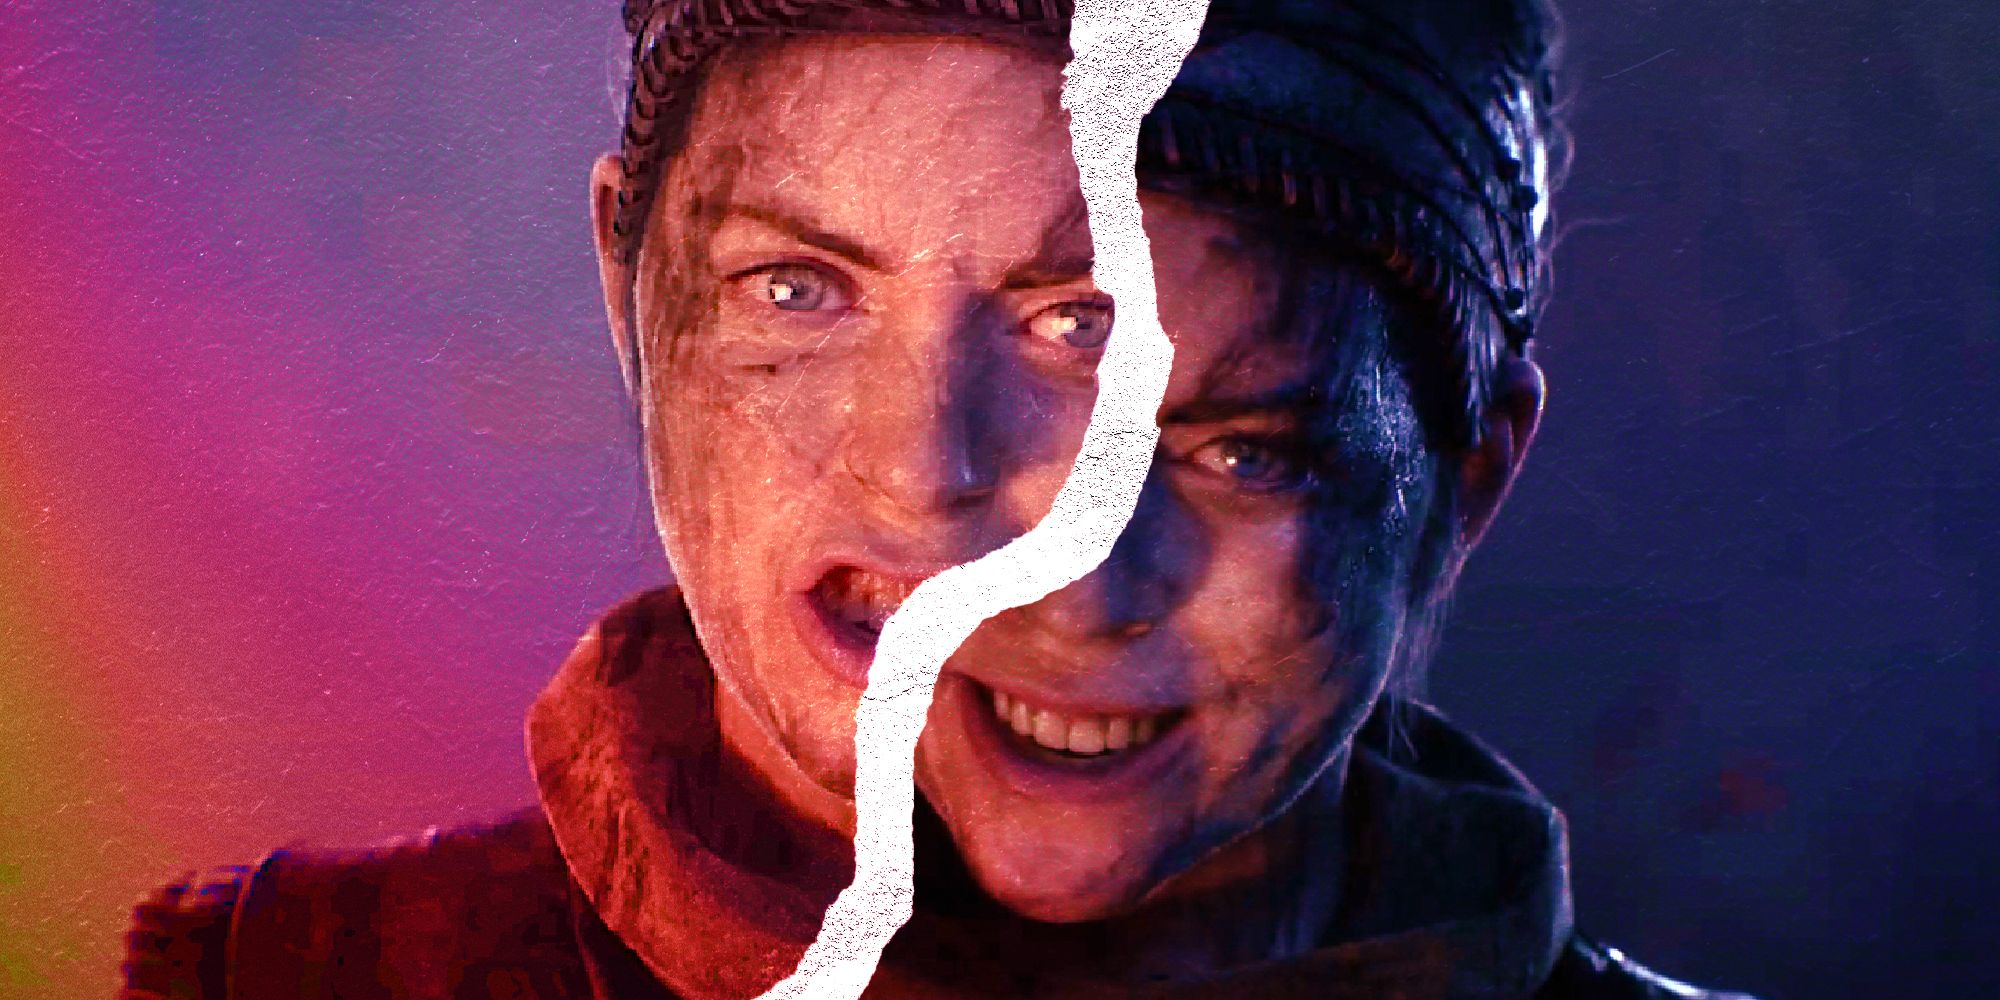 Hellblade 2 conflicted feelings represented by Senuas different facial expressions, separated by a white crack